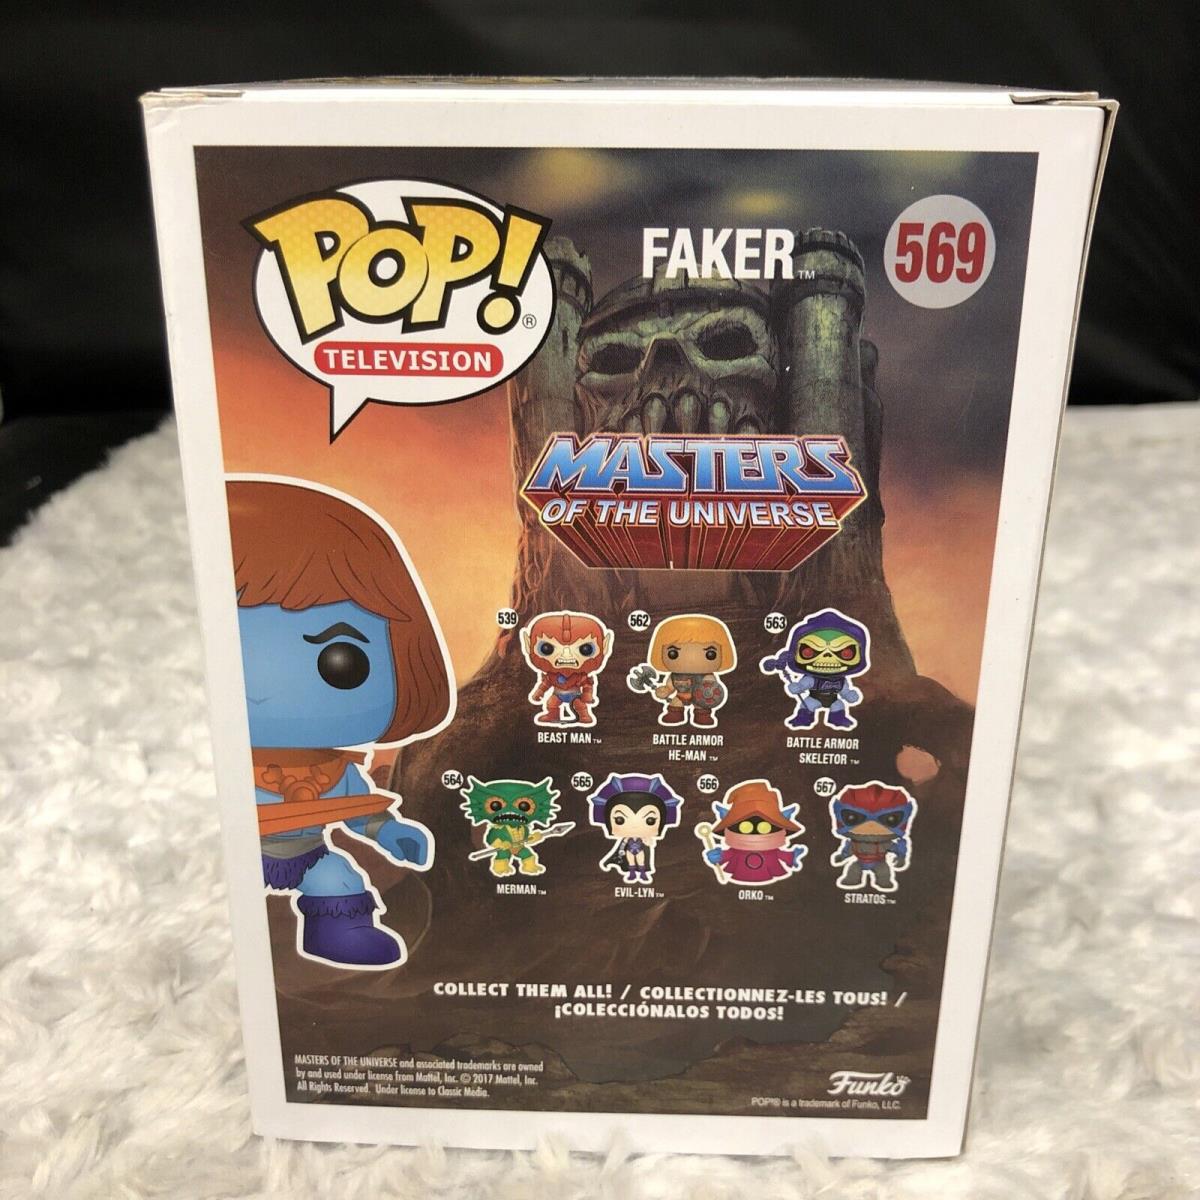 Funko Pop Vinyl: Masters of The Universe - Faker - Target Exclusive 569